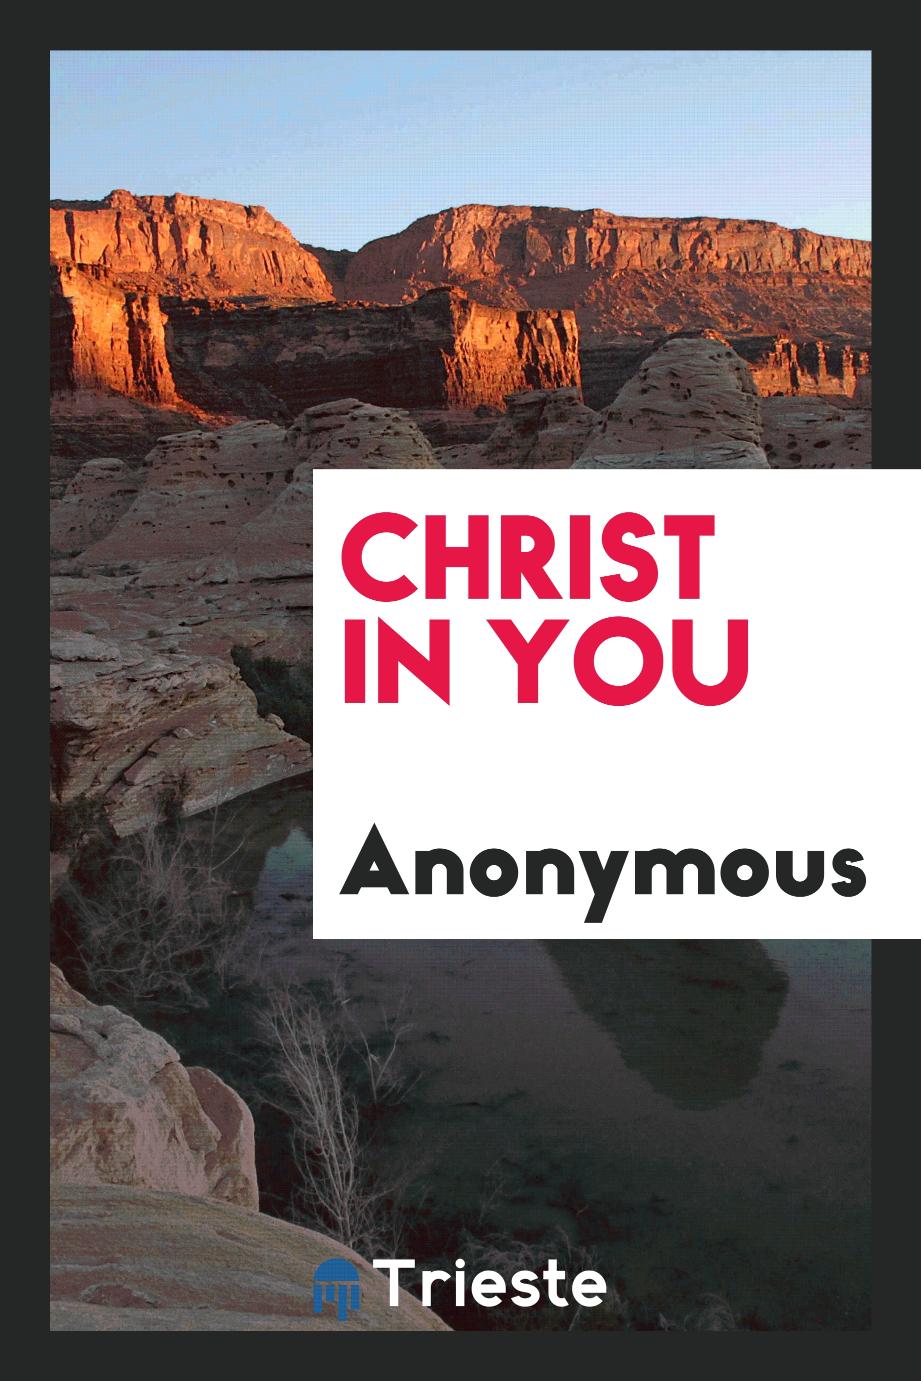 Christ in you